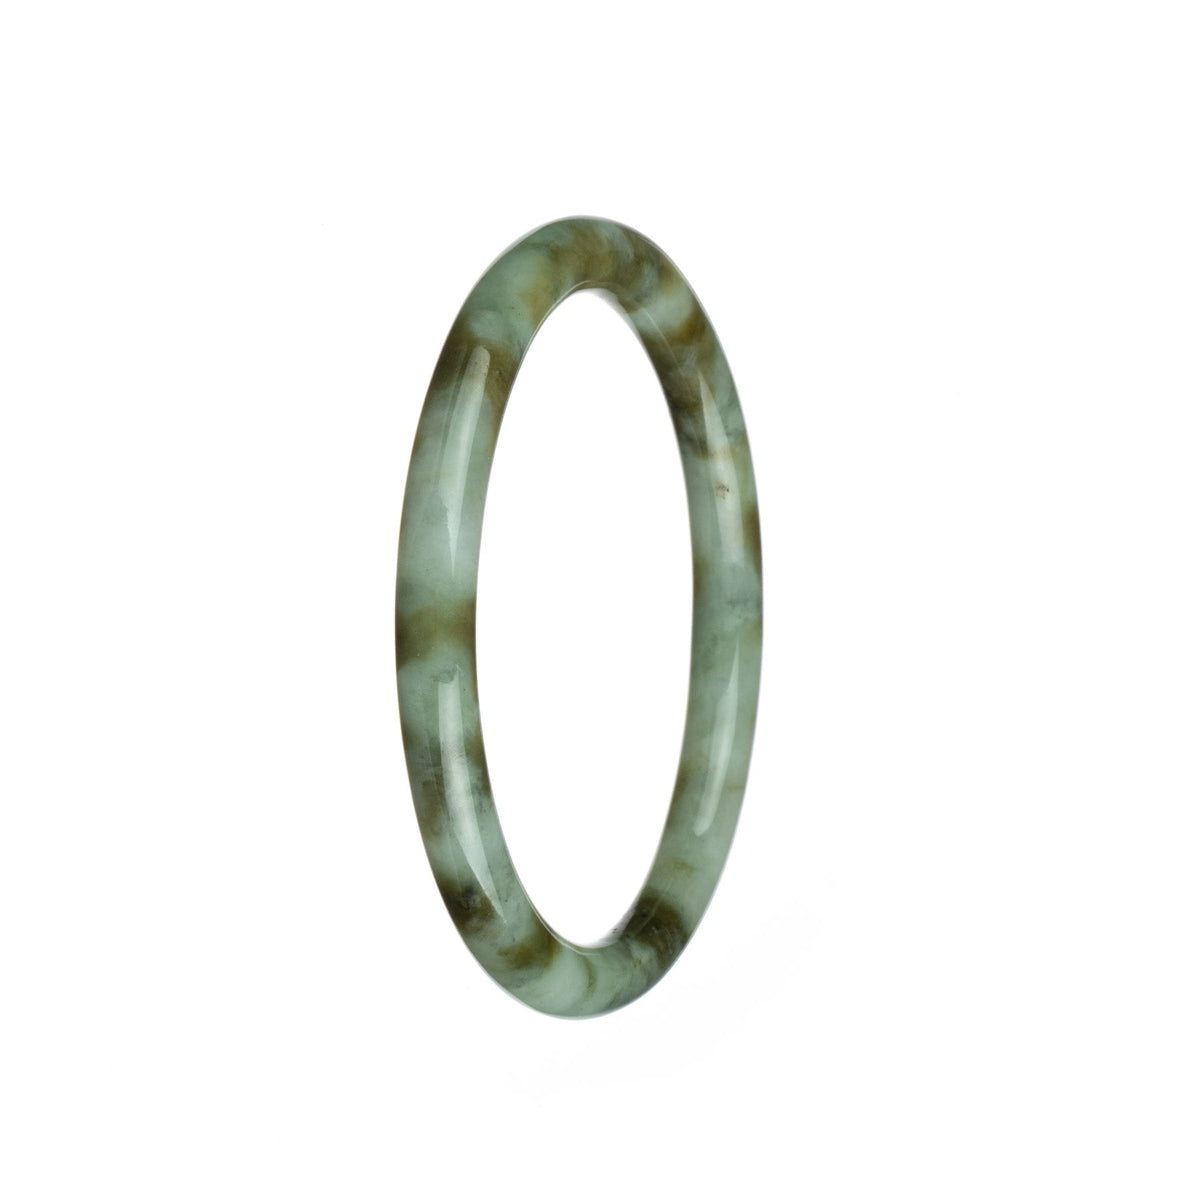 Authentic Untreated White and Brown Pattern Jade Bangle - 60mm Petite Round